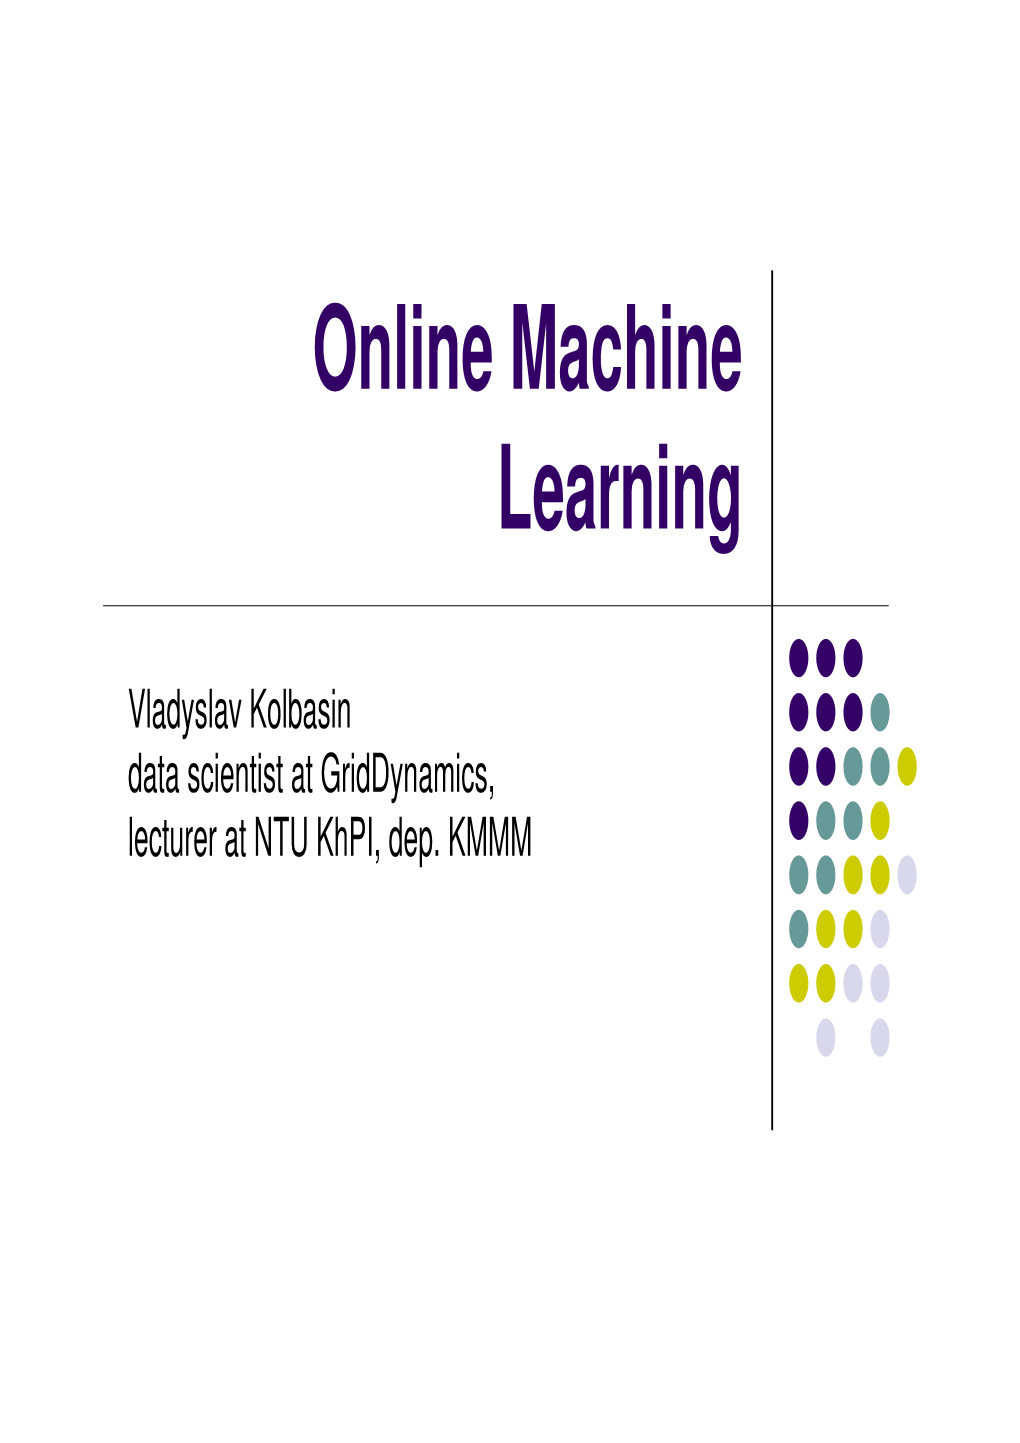 Online Machine Learning